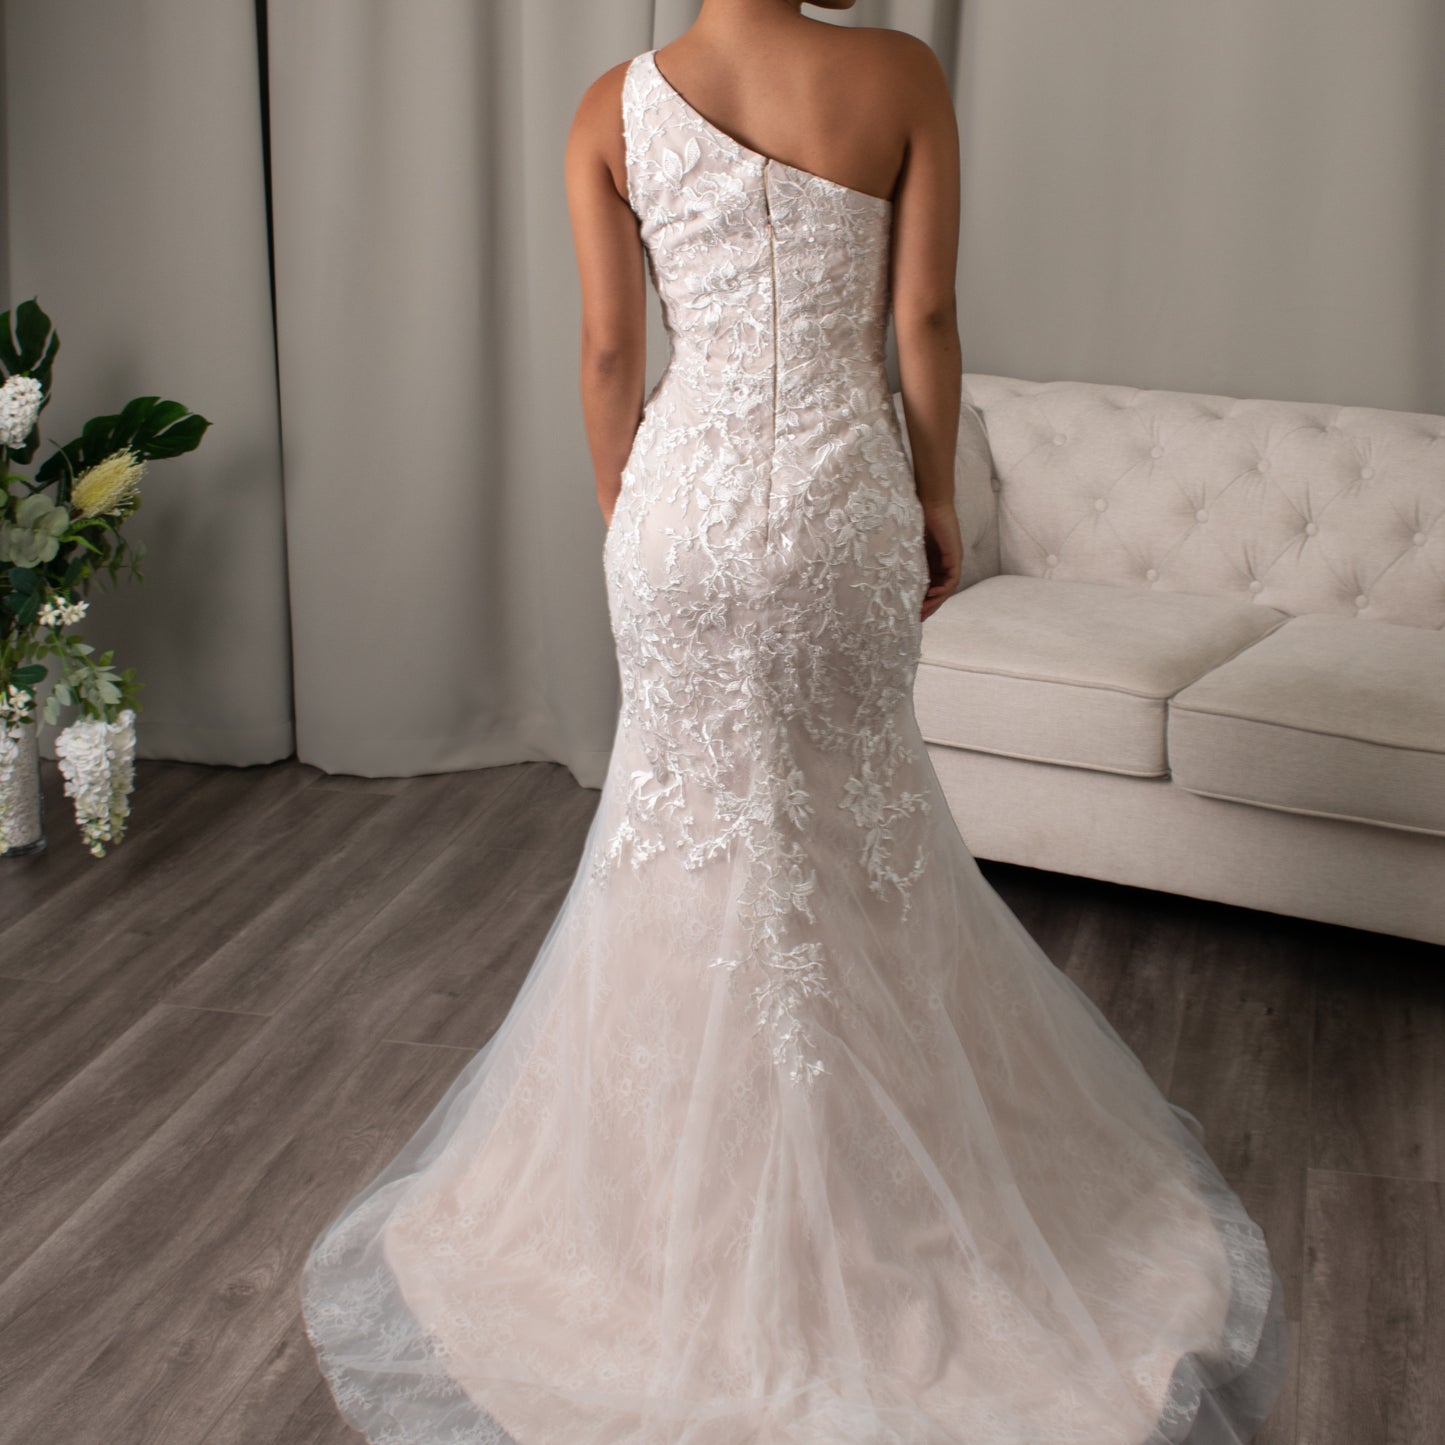 Giselle Lace Mermaid Bridal Dress with Detachable Skirt by Divine Bridal.